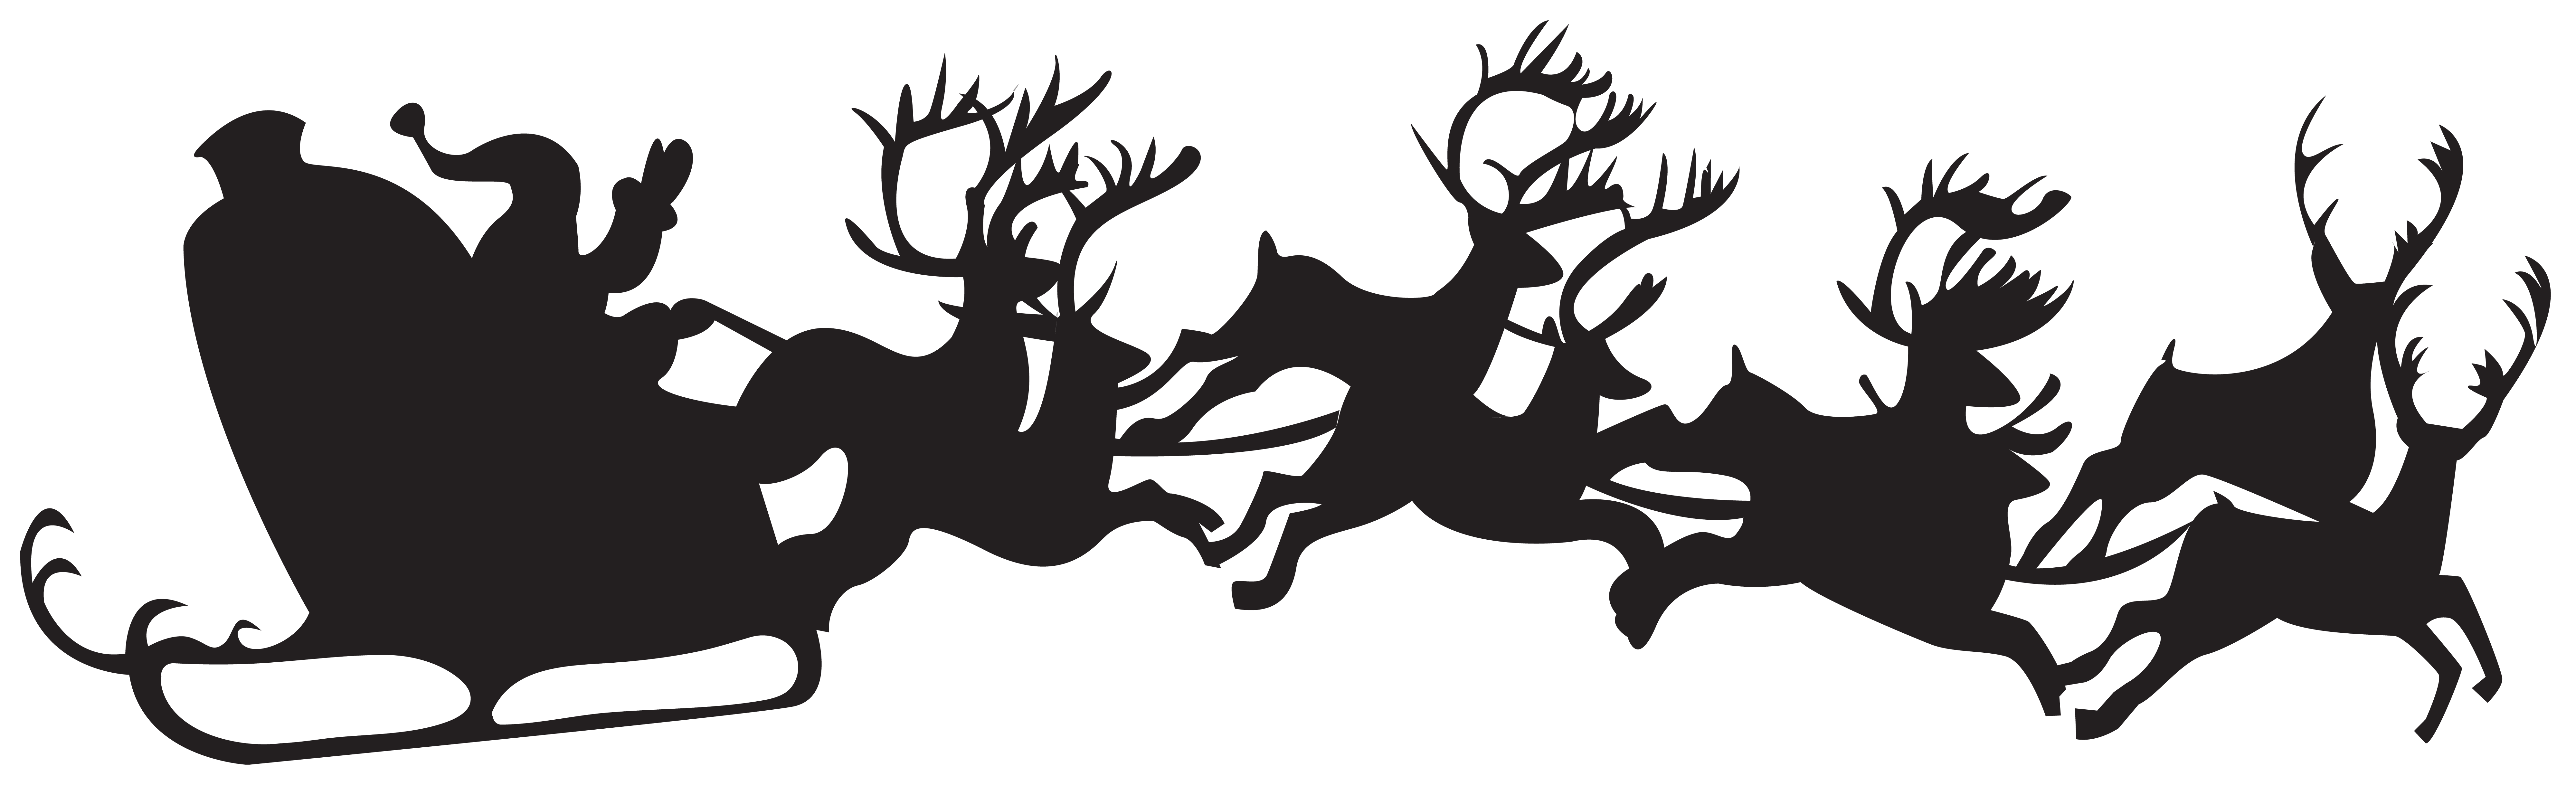 Christmas Silhouette Santa Claus with Sleigh PNG Clip Art.